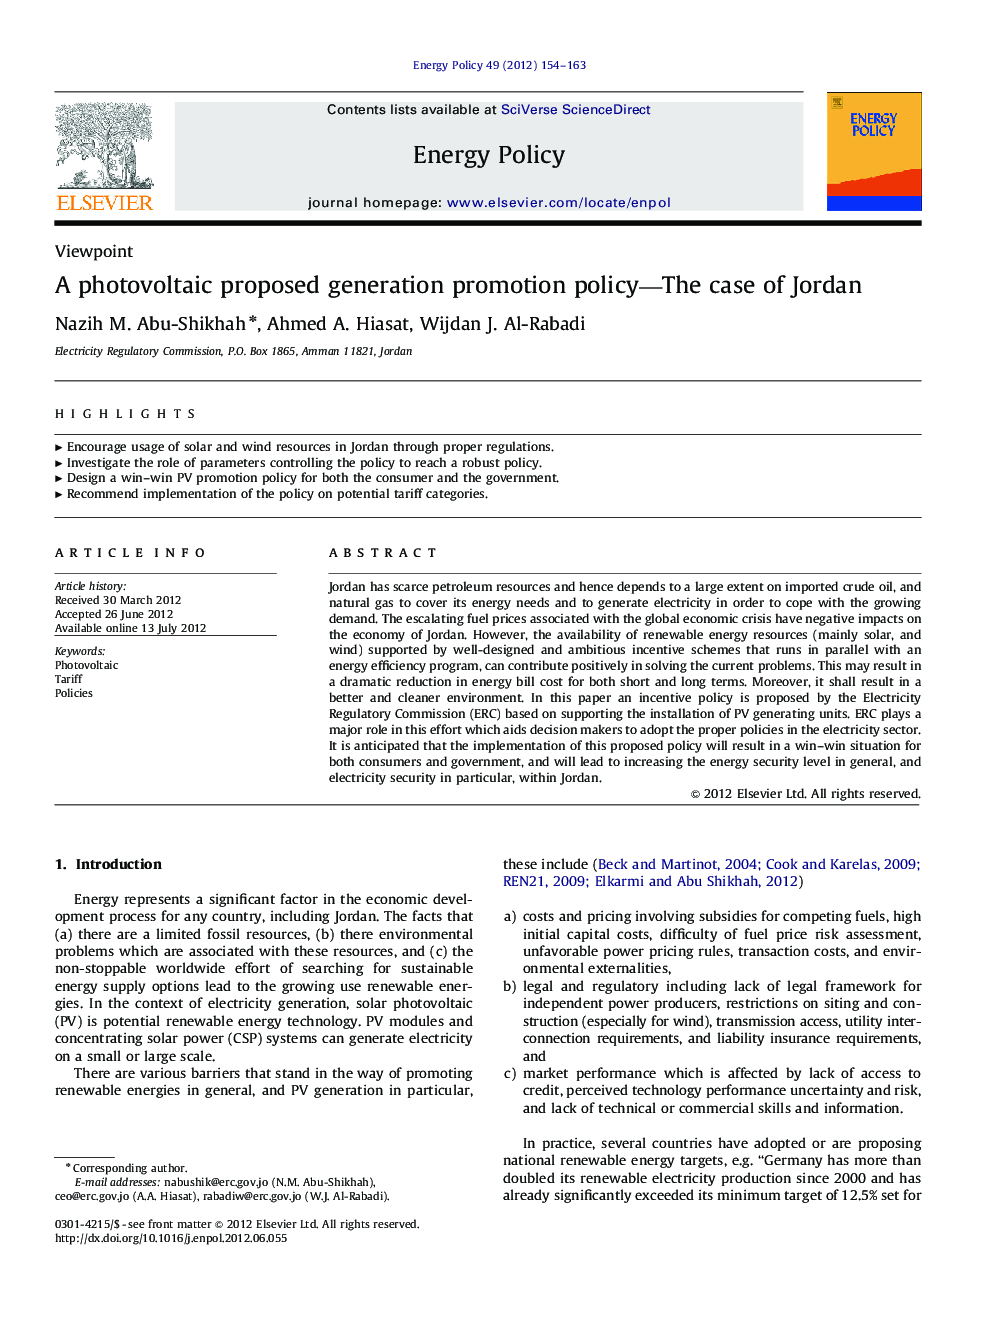 A photovoltaic proposed generation promotion policy-The case of Jordan